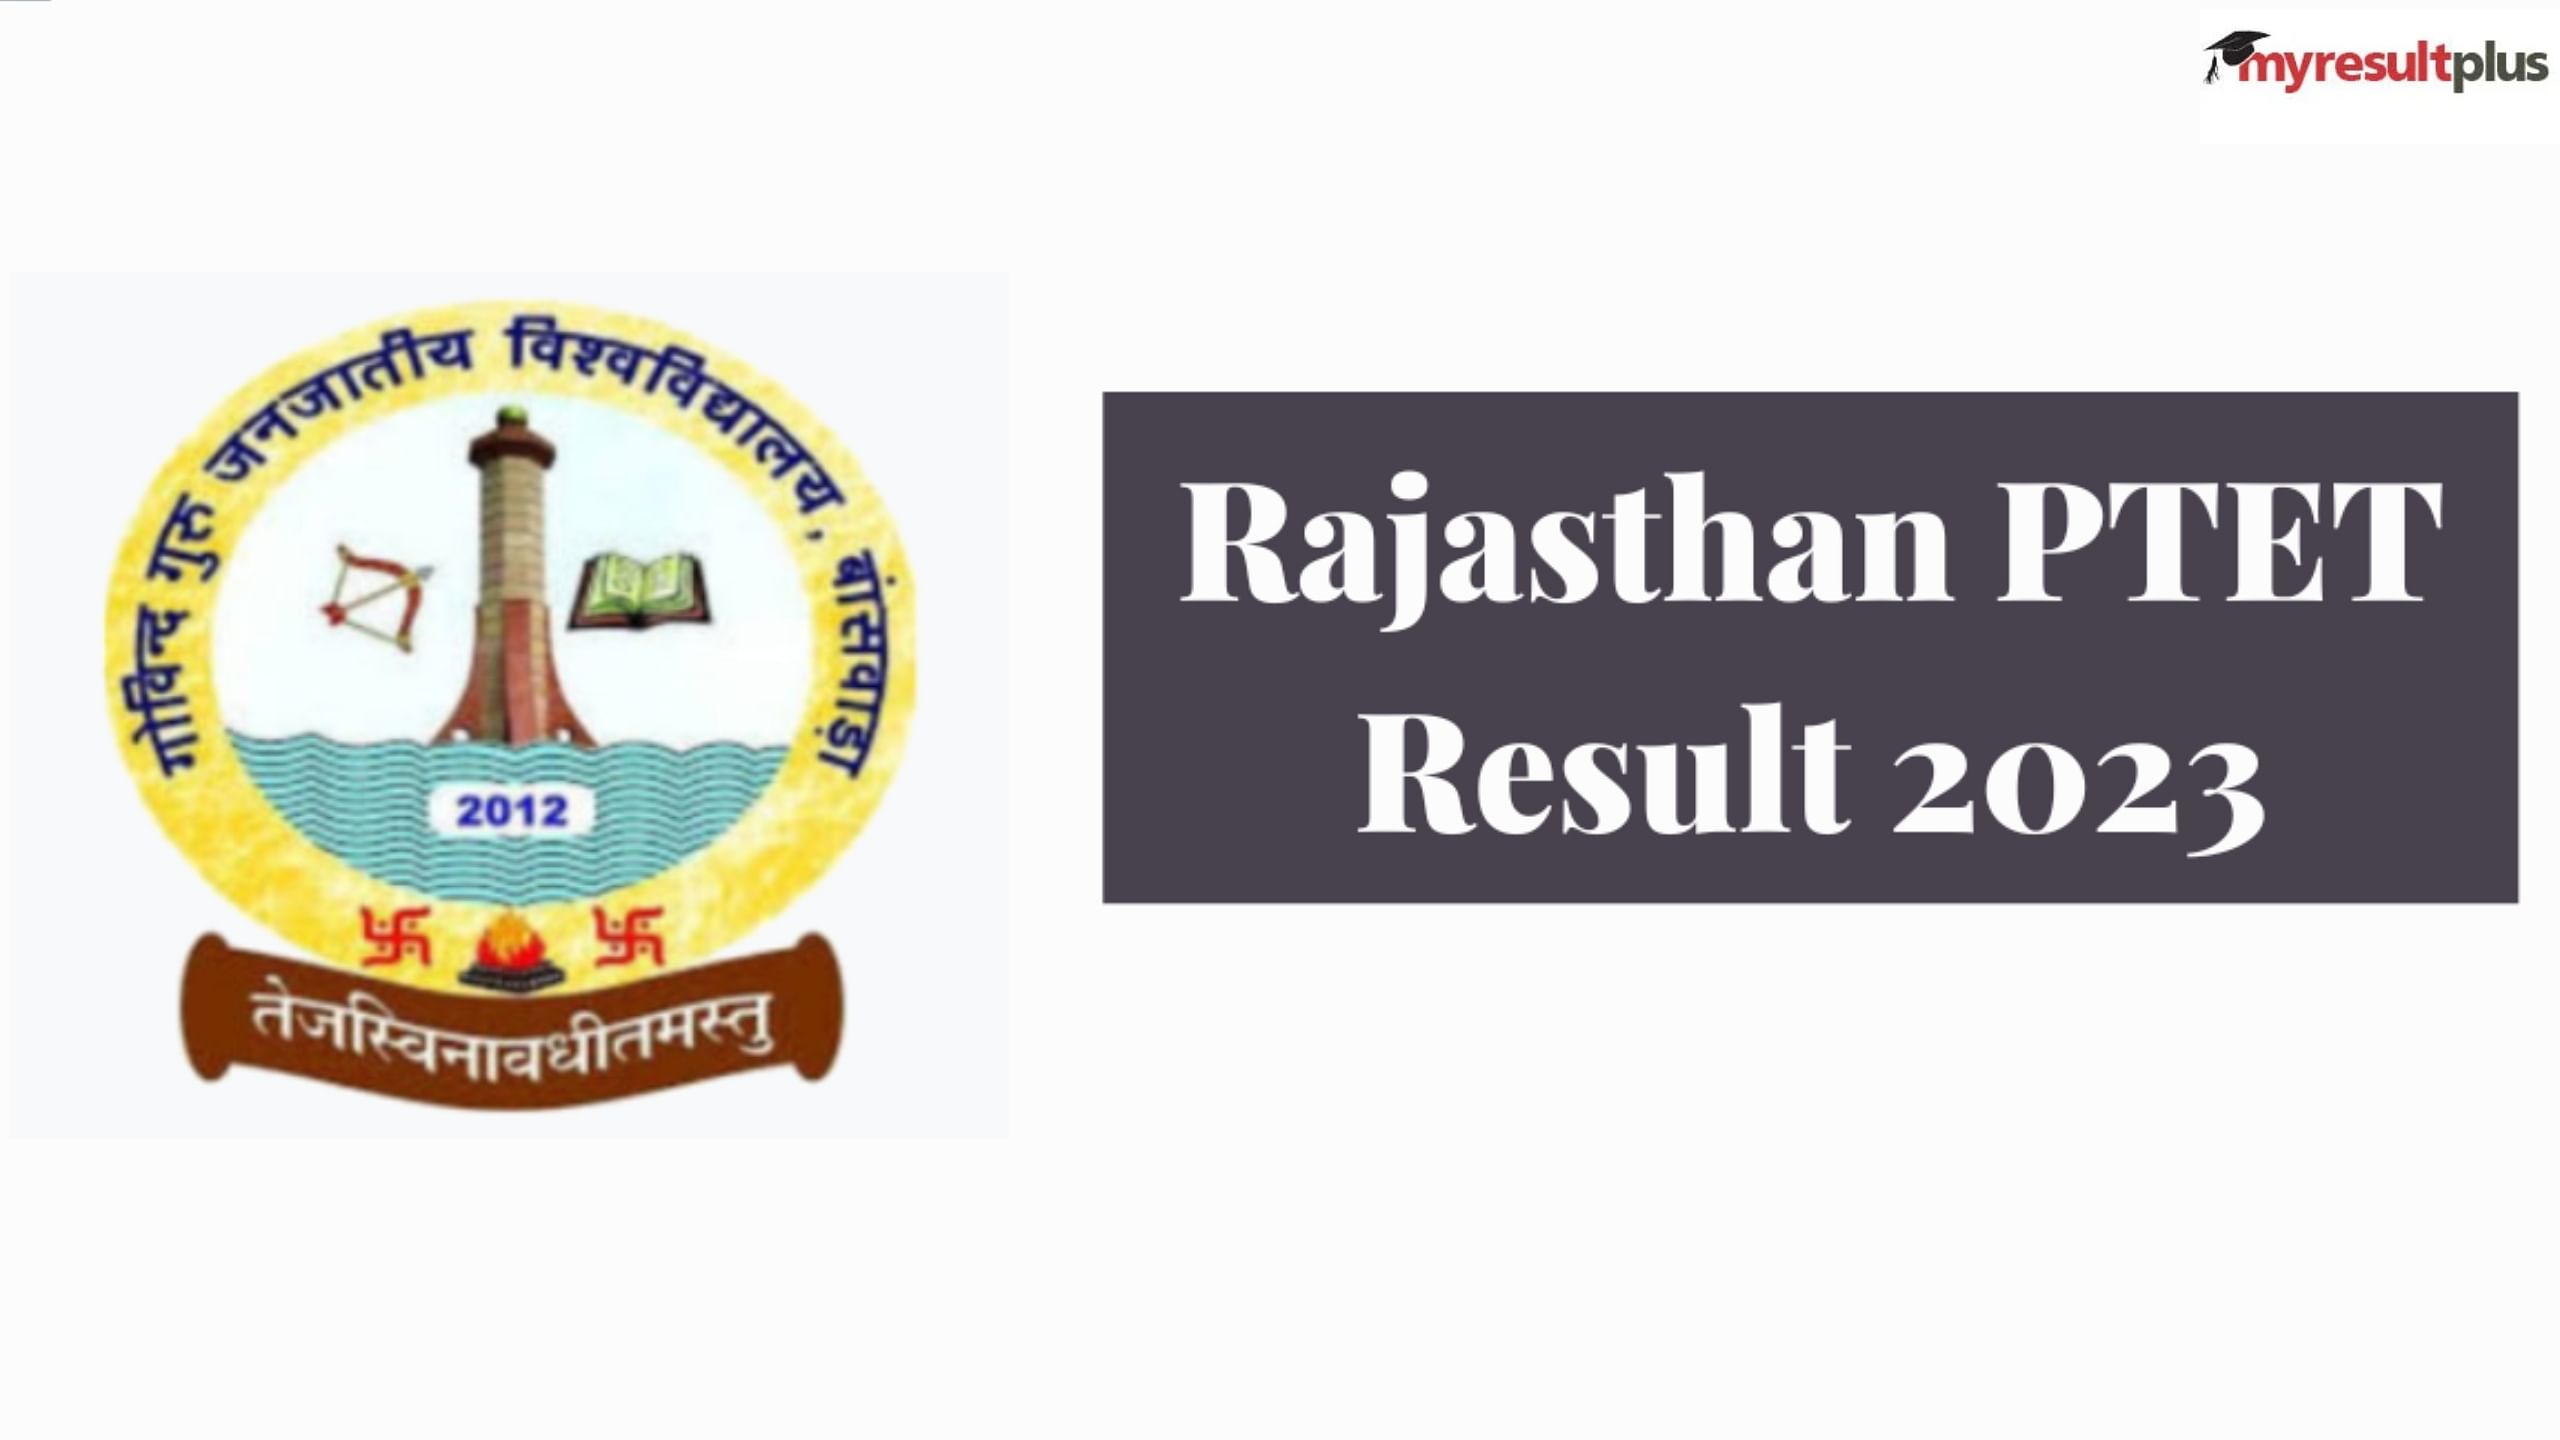 Rajasthan PTET 2023 Result Declared for B.Ed Courses at ptetggtu.org, How to Check